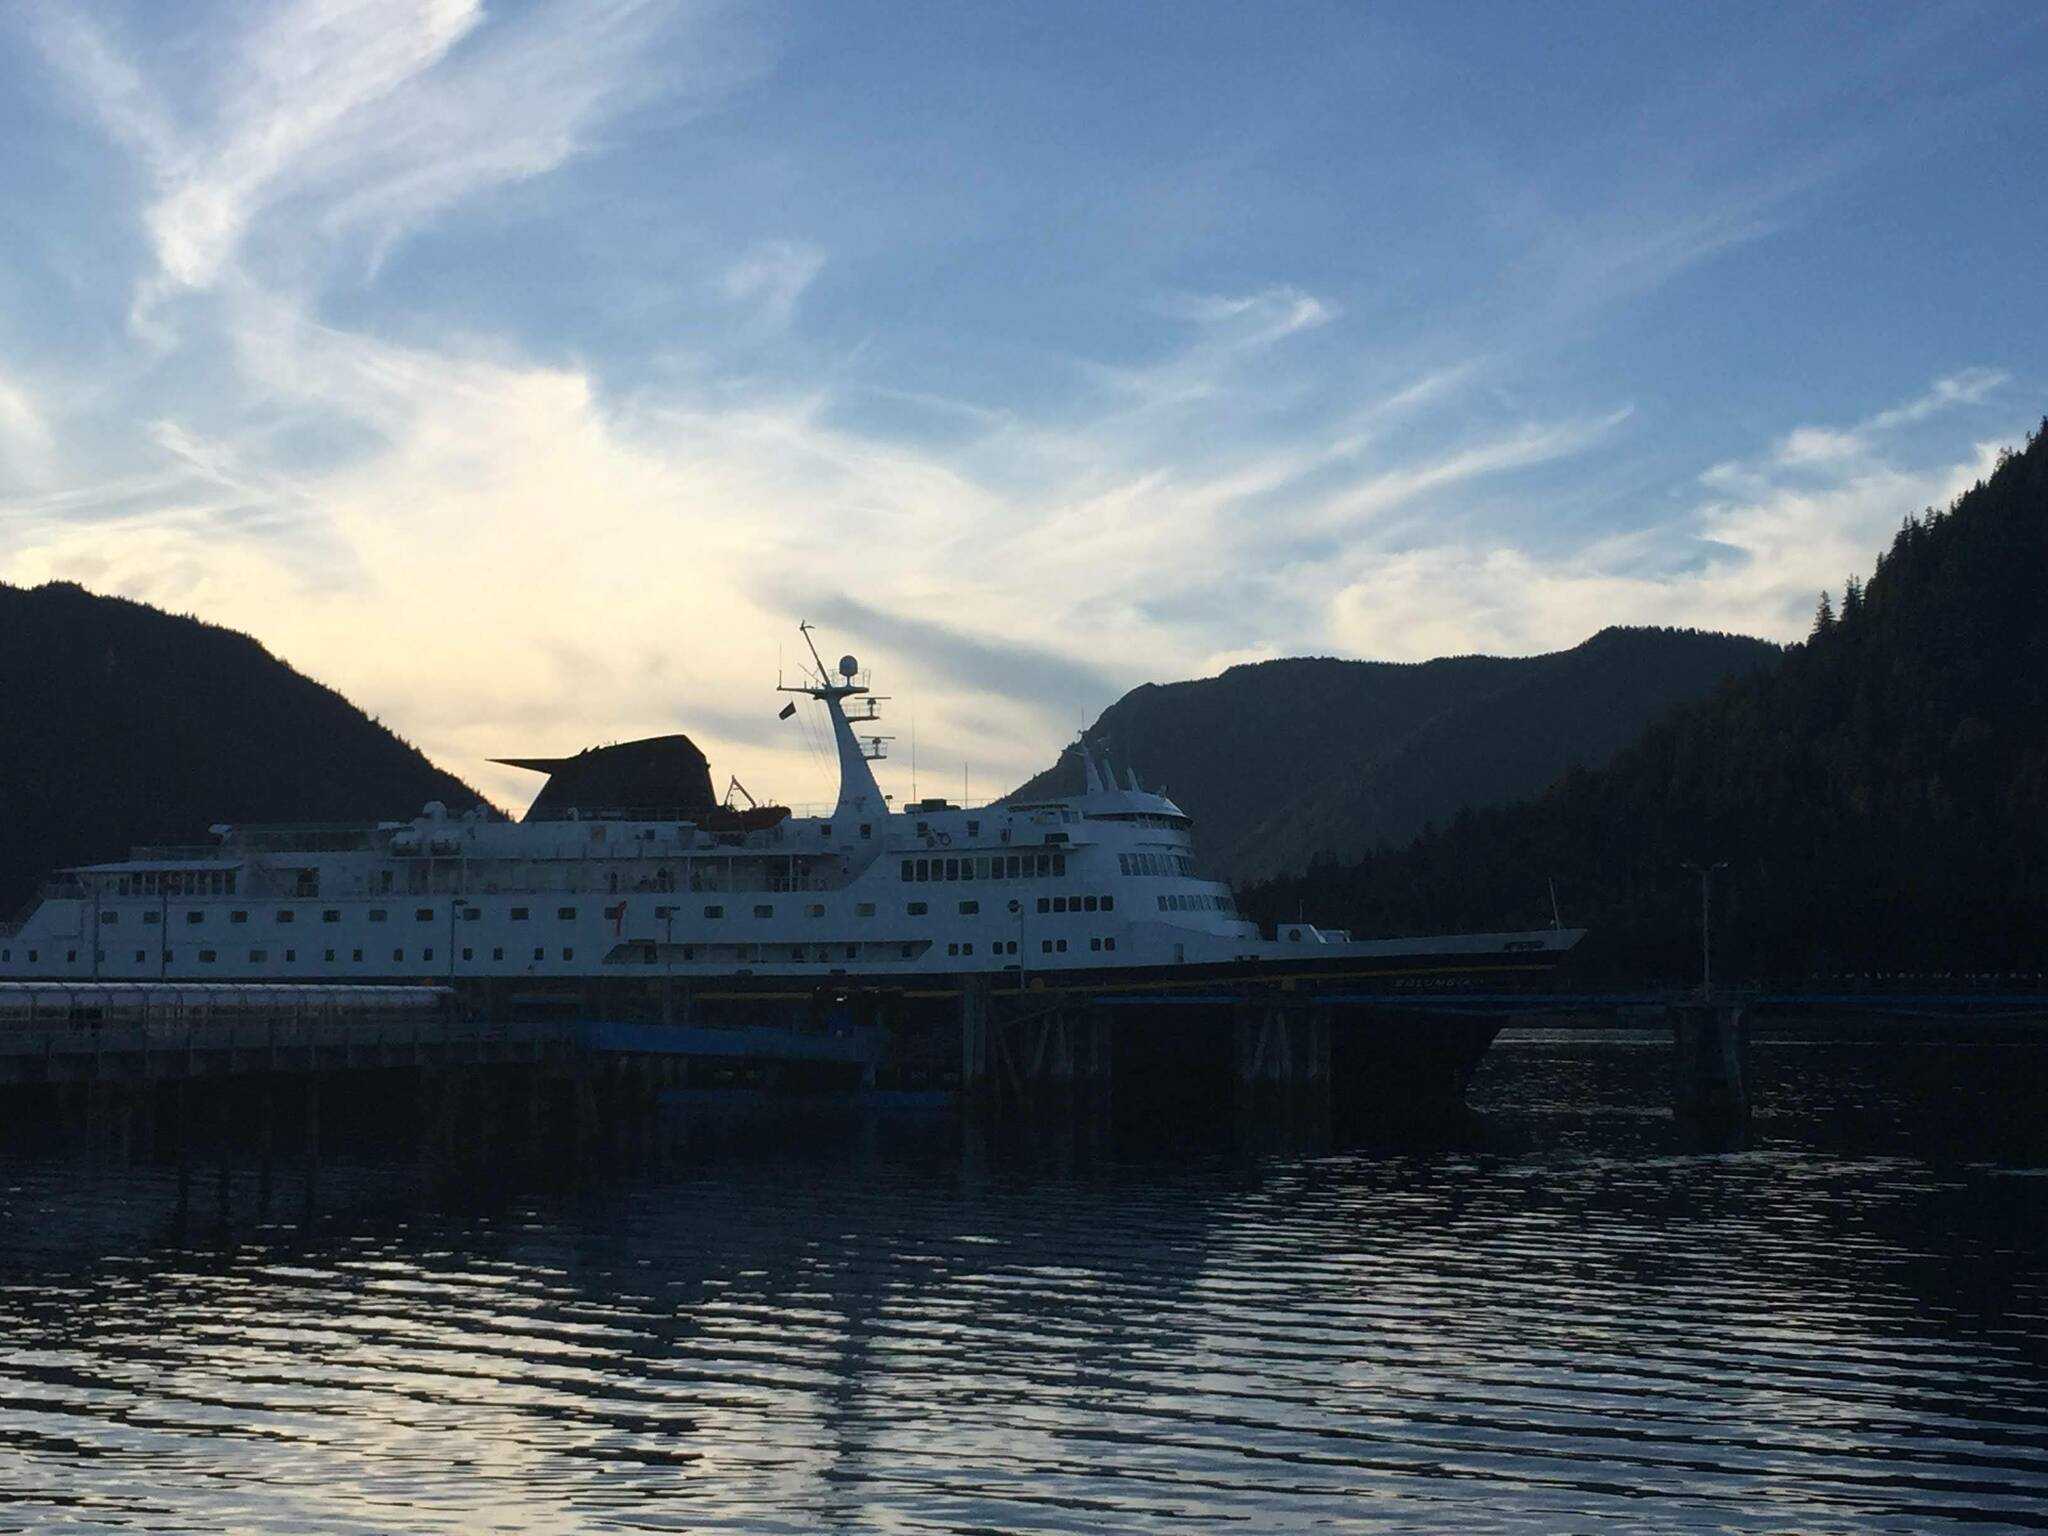 This August 2018 photo shows the MV Columbia in Petersburg. The Columbia is scheduled to return to service this winter for the first time in three years, according to the Alaska Department of Transportation and Public Facilities. (Ben Hohenstatt / Juneau Empire File)